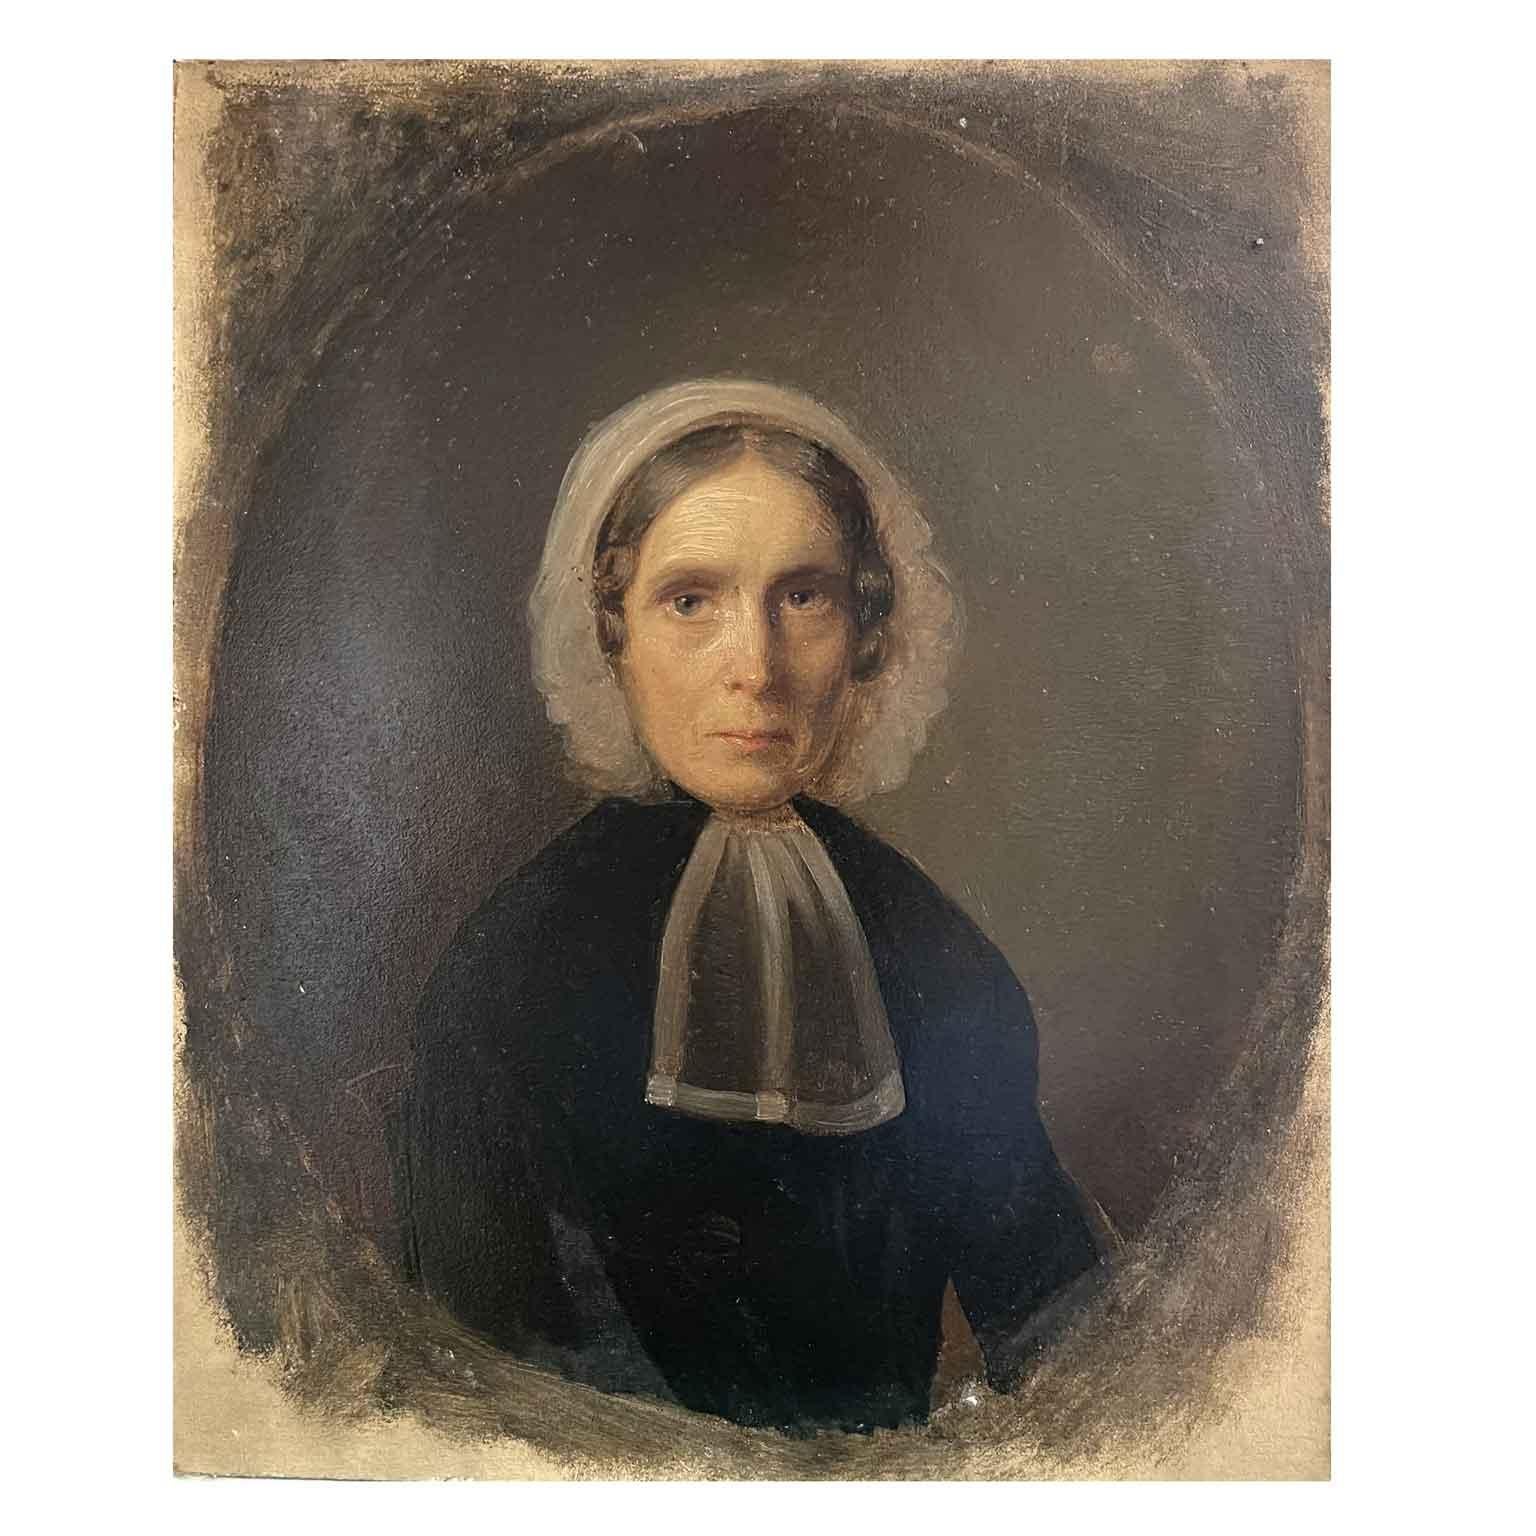 19th Century Flemish School Portrait of a Lady oil on cardboard painting, rectangular shape, with an overlaid oval gilt cardboard, set in a rectangular gilt frame. It depicts a middle-aged lady, with a severe expression, dressed in a black dress